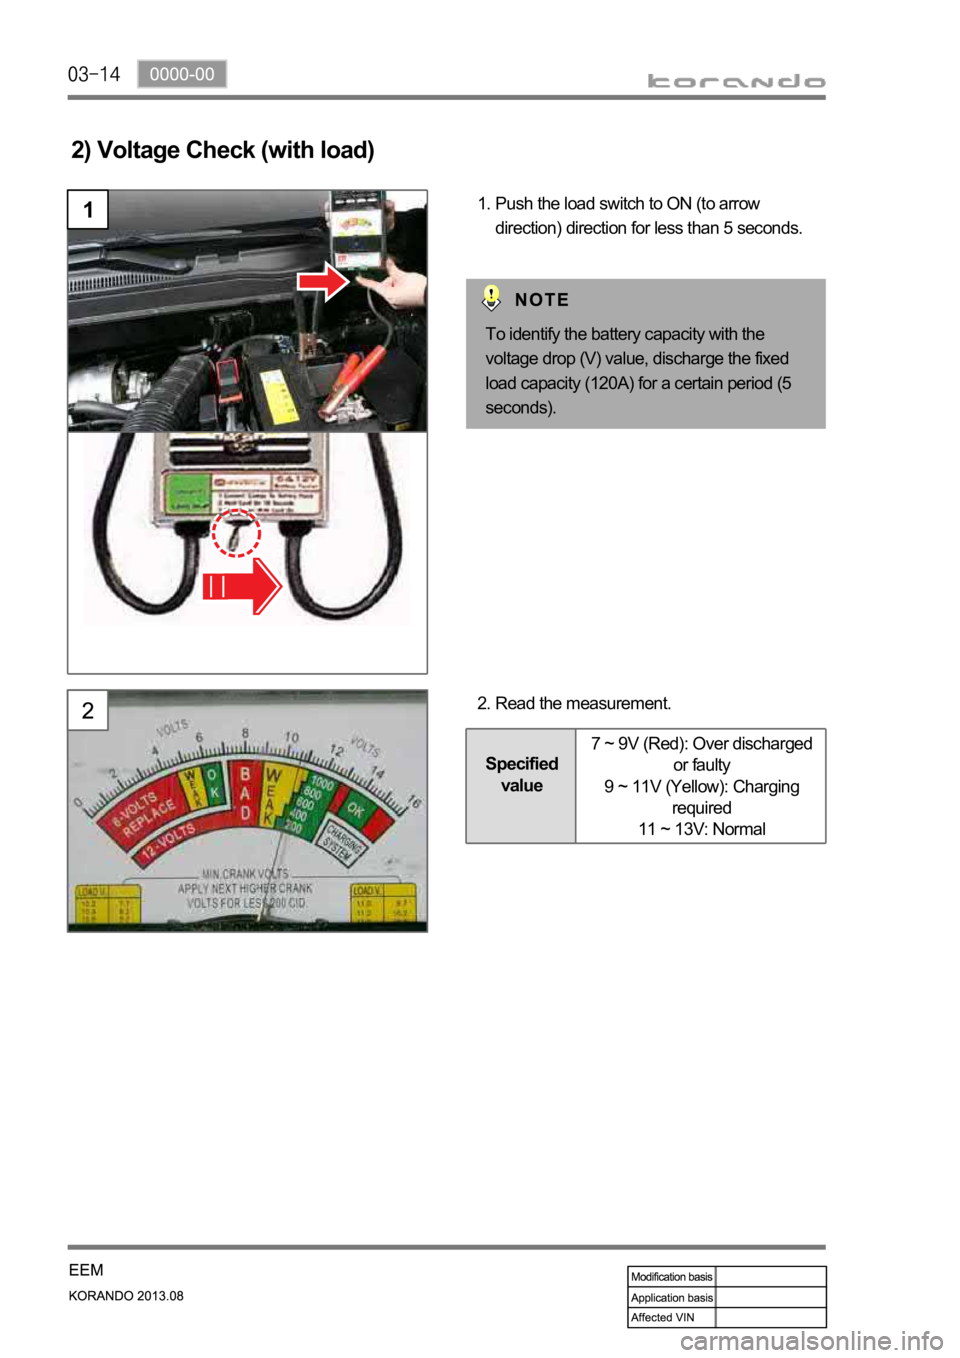 SSANGYONG KORANDO 2013  Service Manual 2) Voltage Check (with load)
1Push the load switch to ON (to arrow 
direction) direction for less than 5 seconds. 1.
Read the measurement. 2.
Specified 
value7 ~ 9V (Red): Over discharged 
or faulty
9